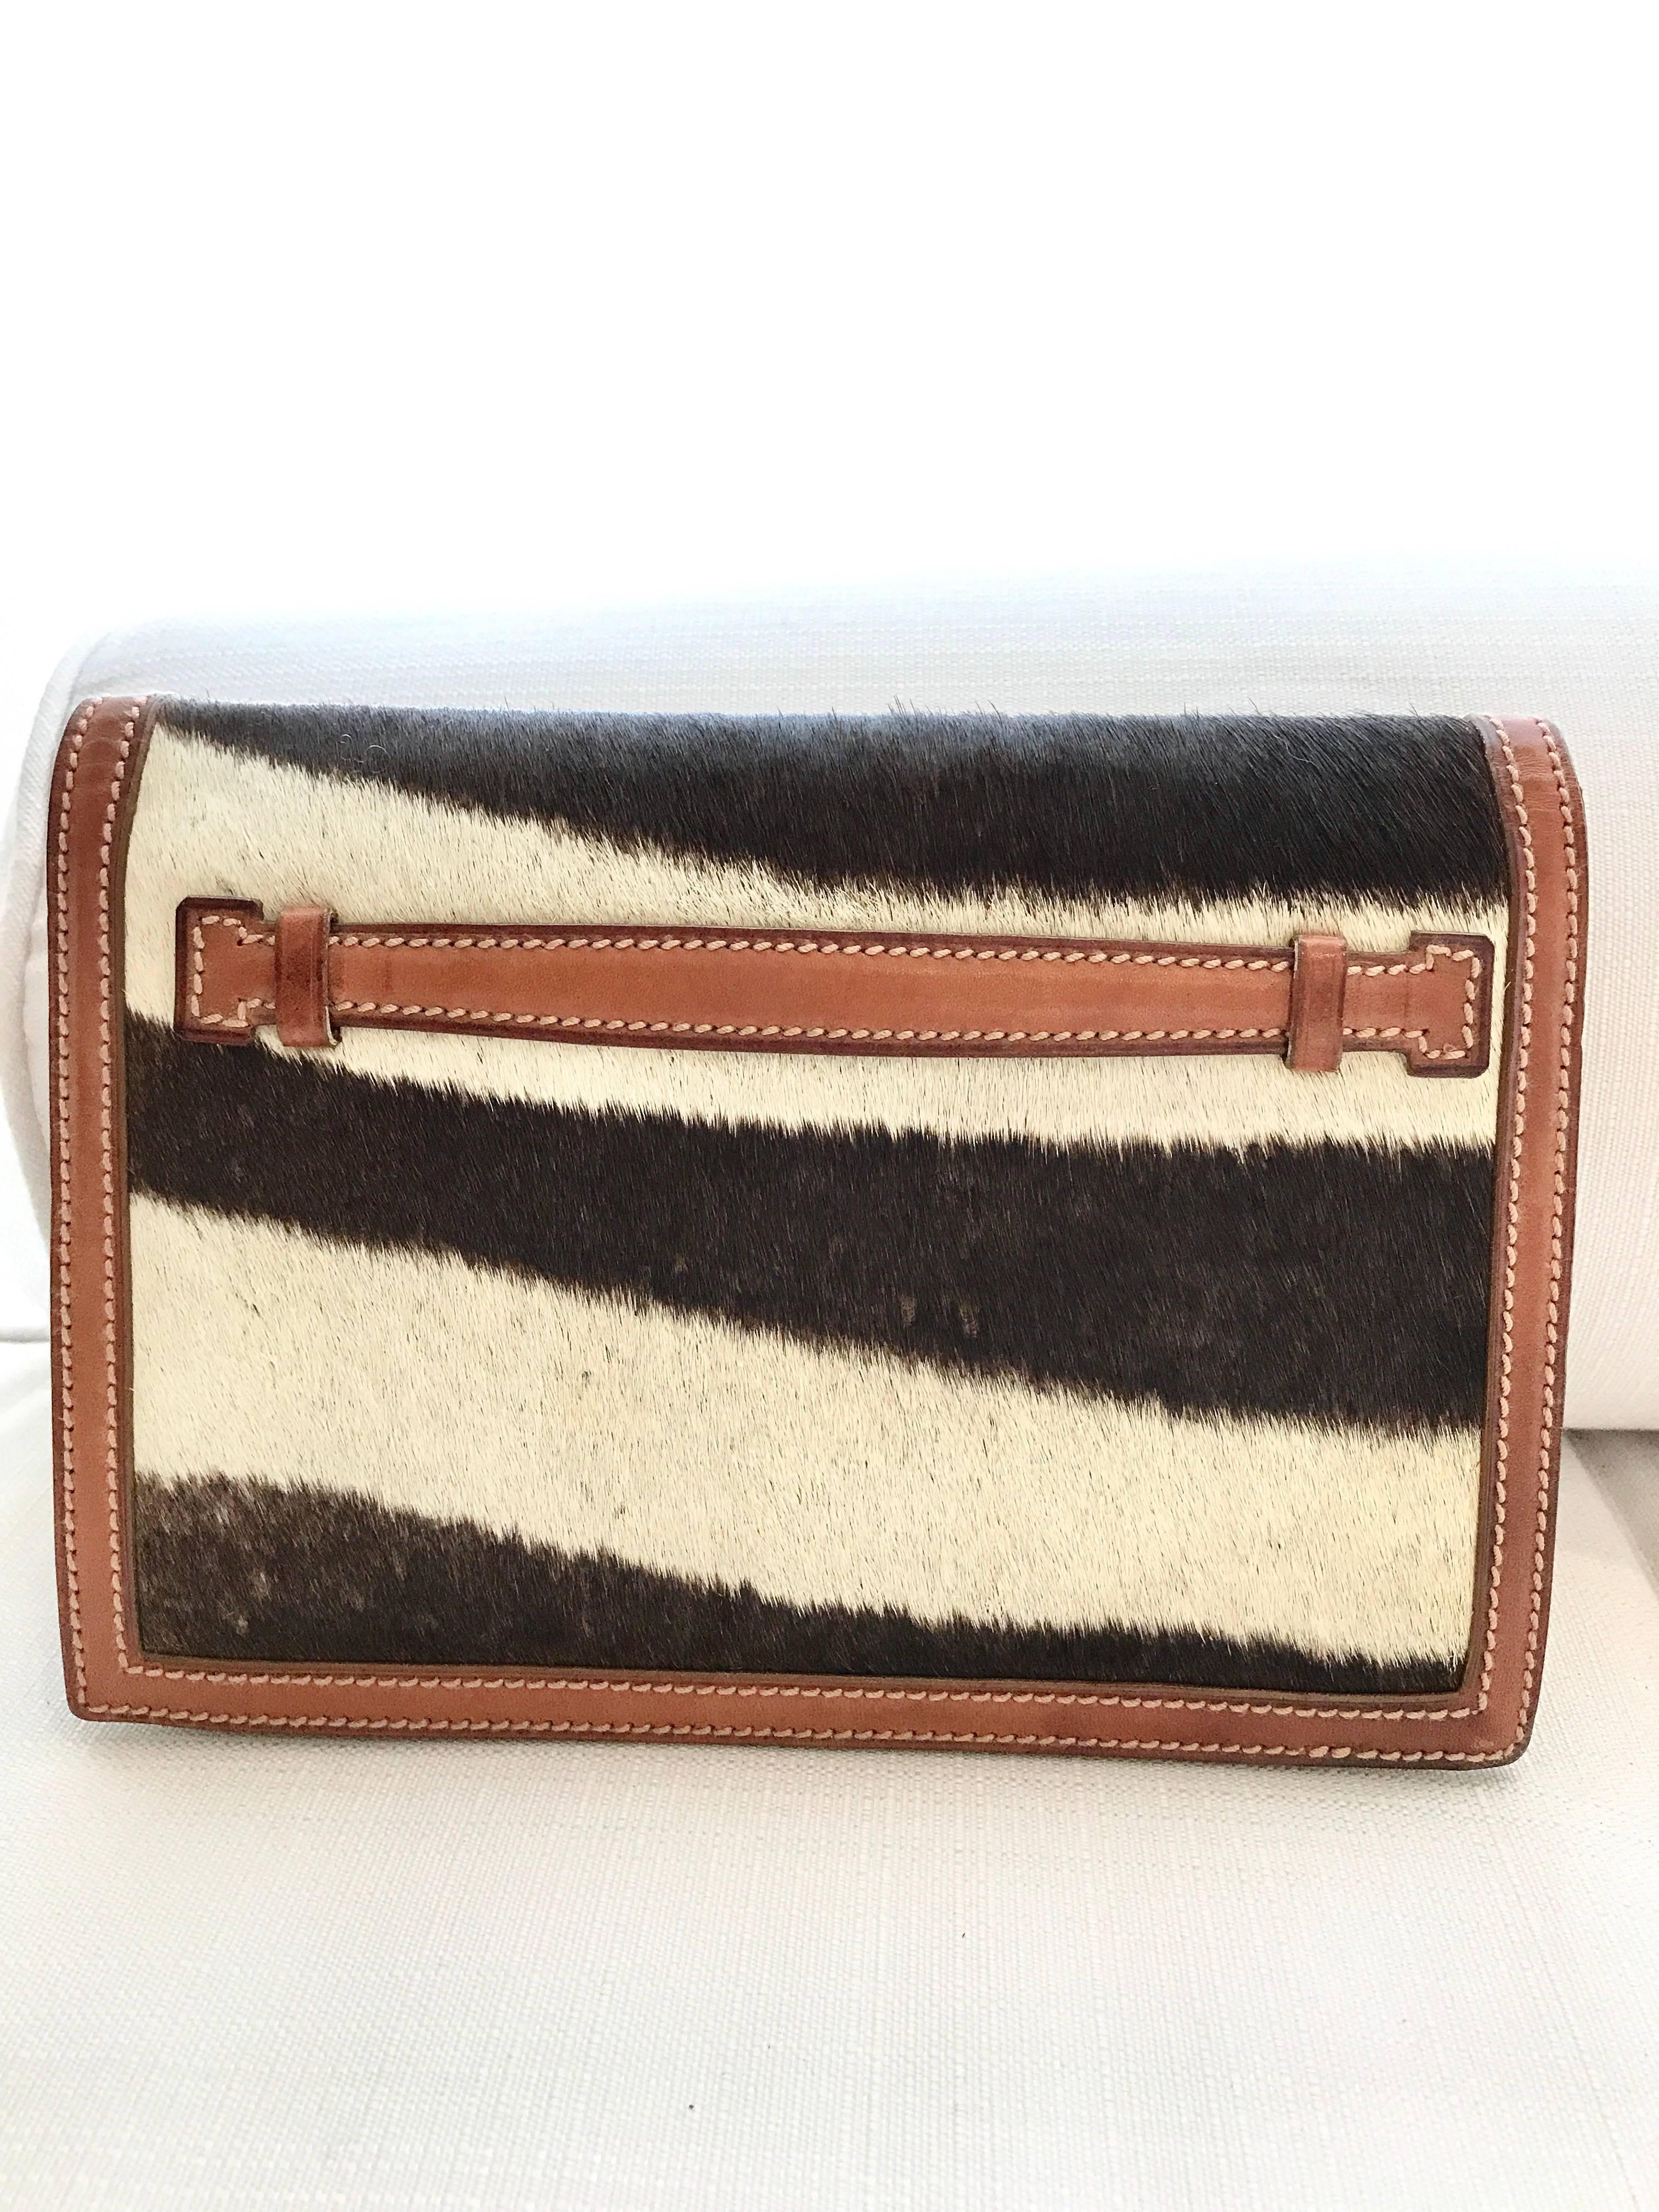 Timeless and chic vintage Ralph Lauren pony hair leather clutch. 
Fit Iphone 7 plus, lipstick, key and small credit card wallet. 
Measurement:
Width: 9 inch   /Height: 6 inch  /  Depth:  2 inch
